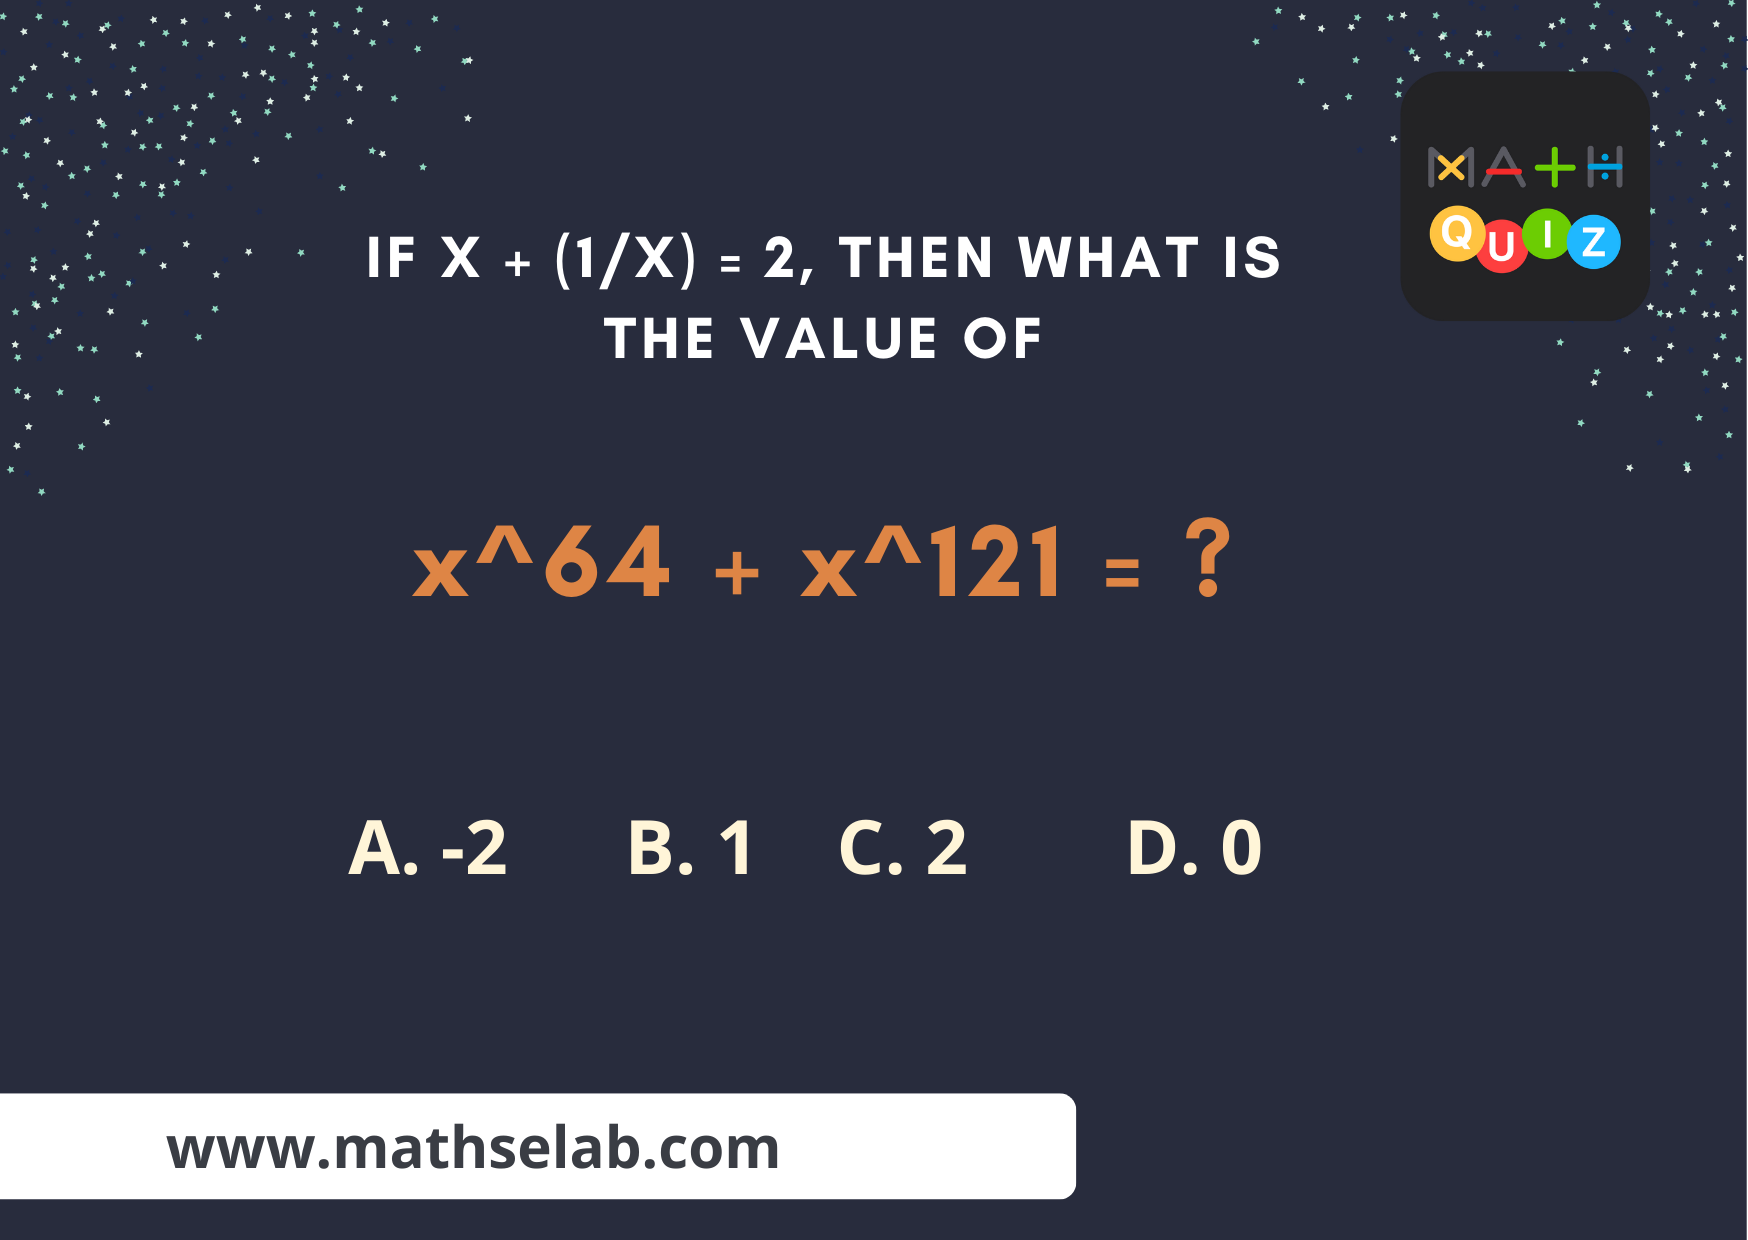 If x + (1x) = 2, then what is the value of x^64 + x^121 = . - www.mathselab.com